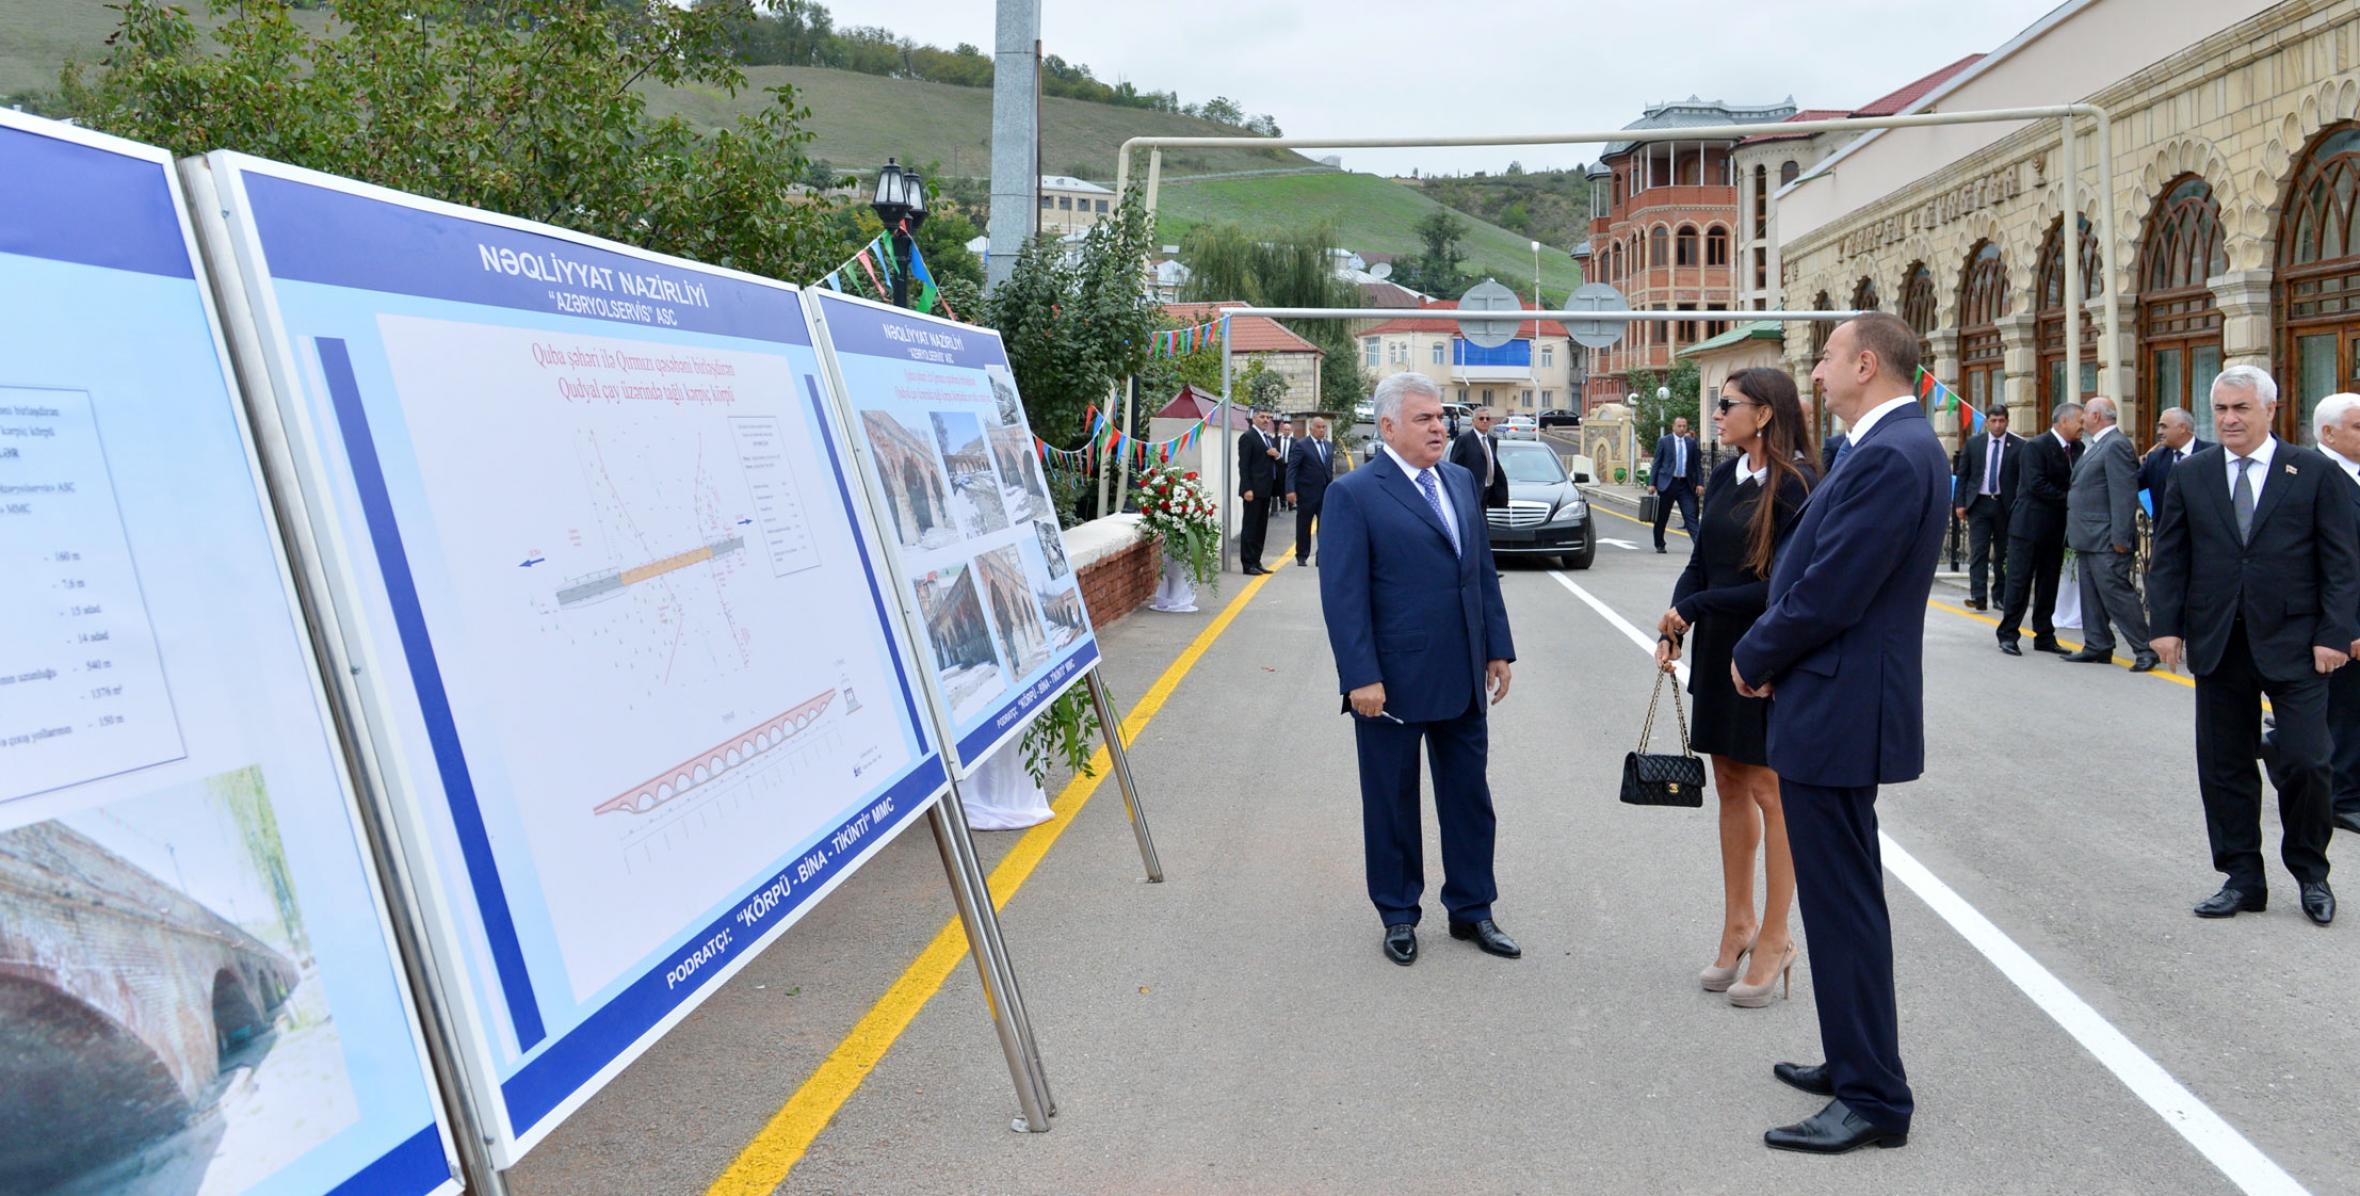 Ilham Aliyev reviewed the condition of the arched "Red Bridge" over the Gudyalchay river in the Krasnaya Sloboda settlement of Guba District after reconstruction